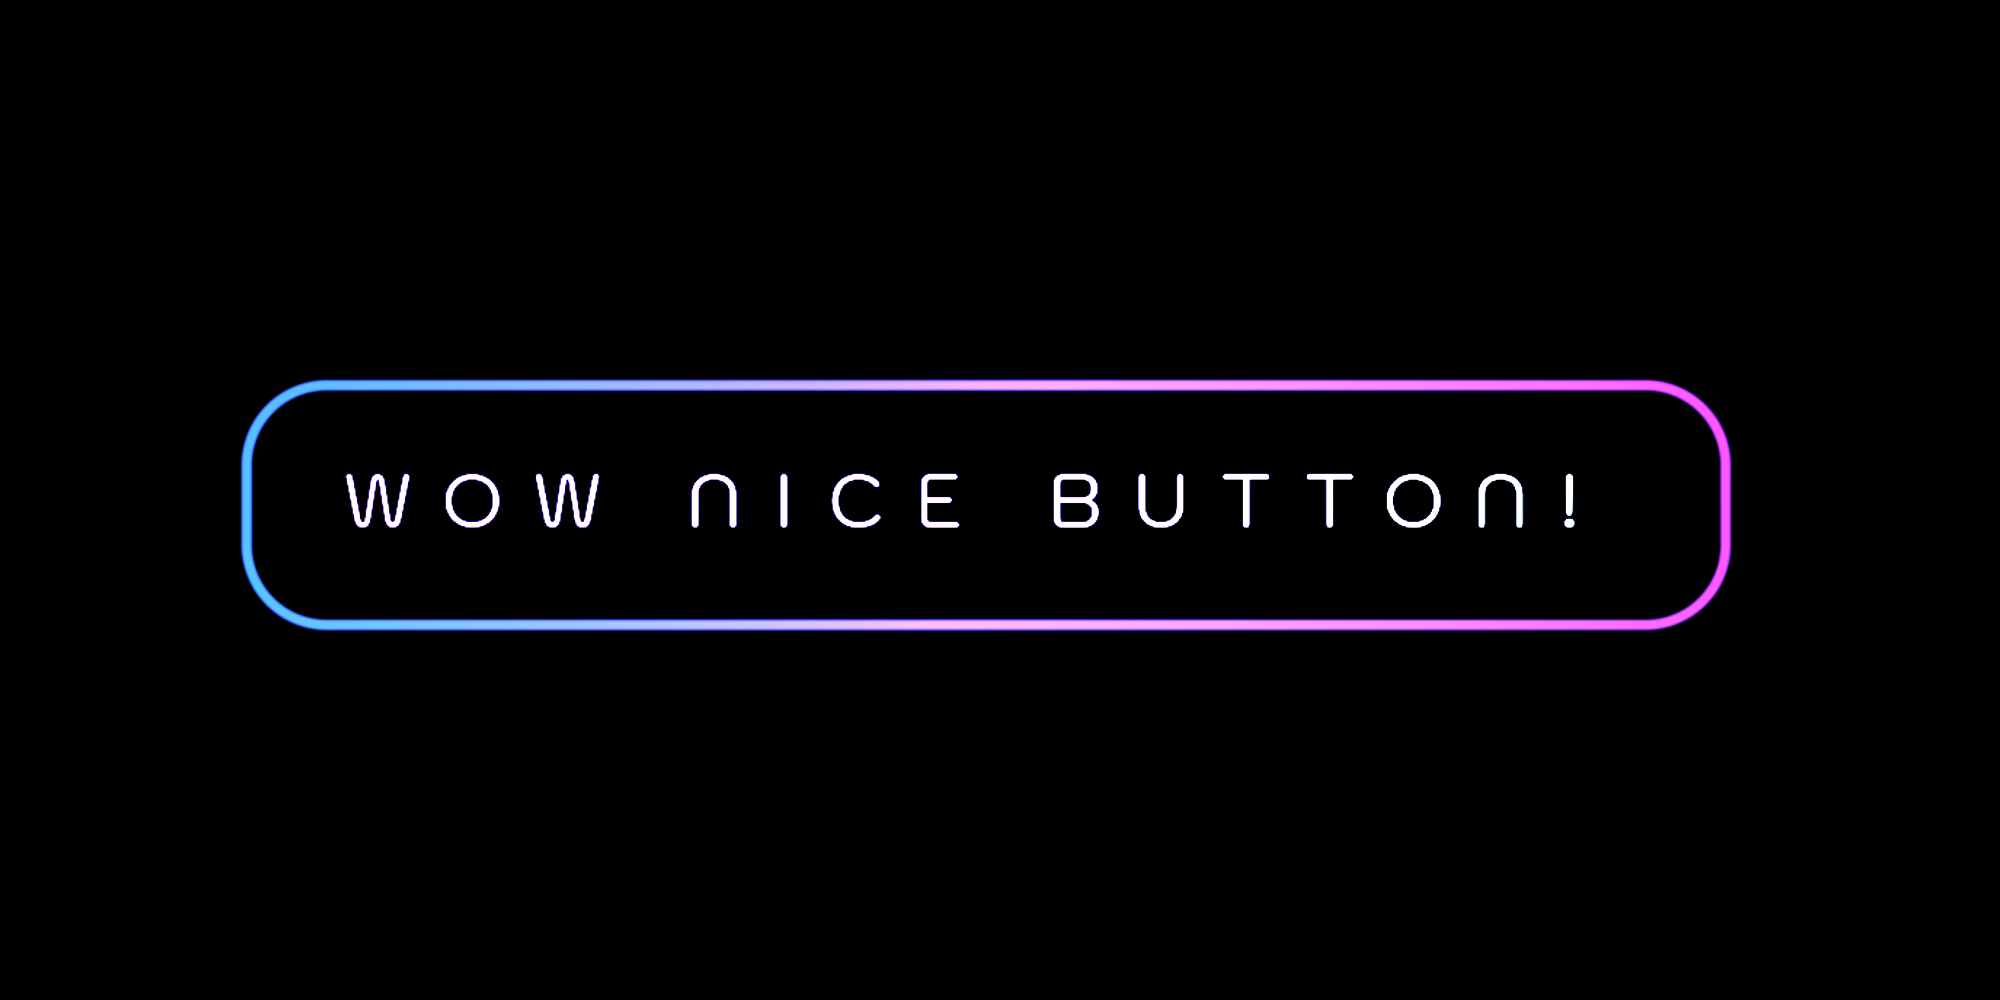 Button with WOW NICE BUTTON! as text and a green to purple border gradient with border-radius.